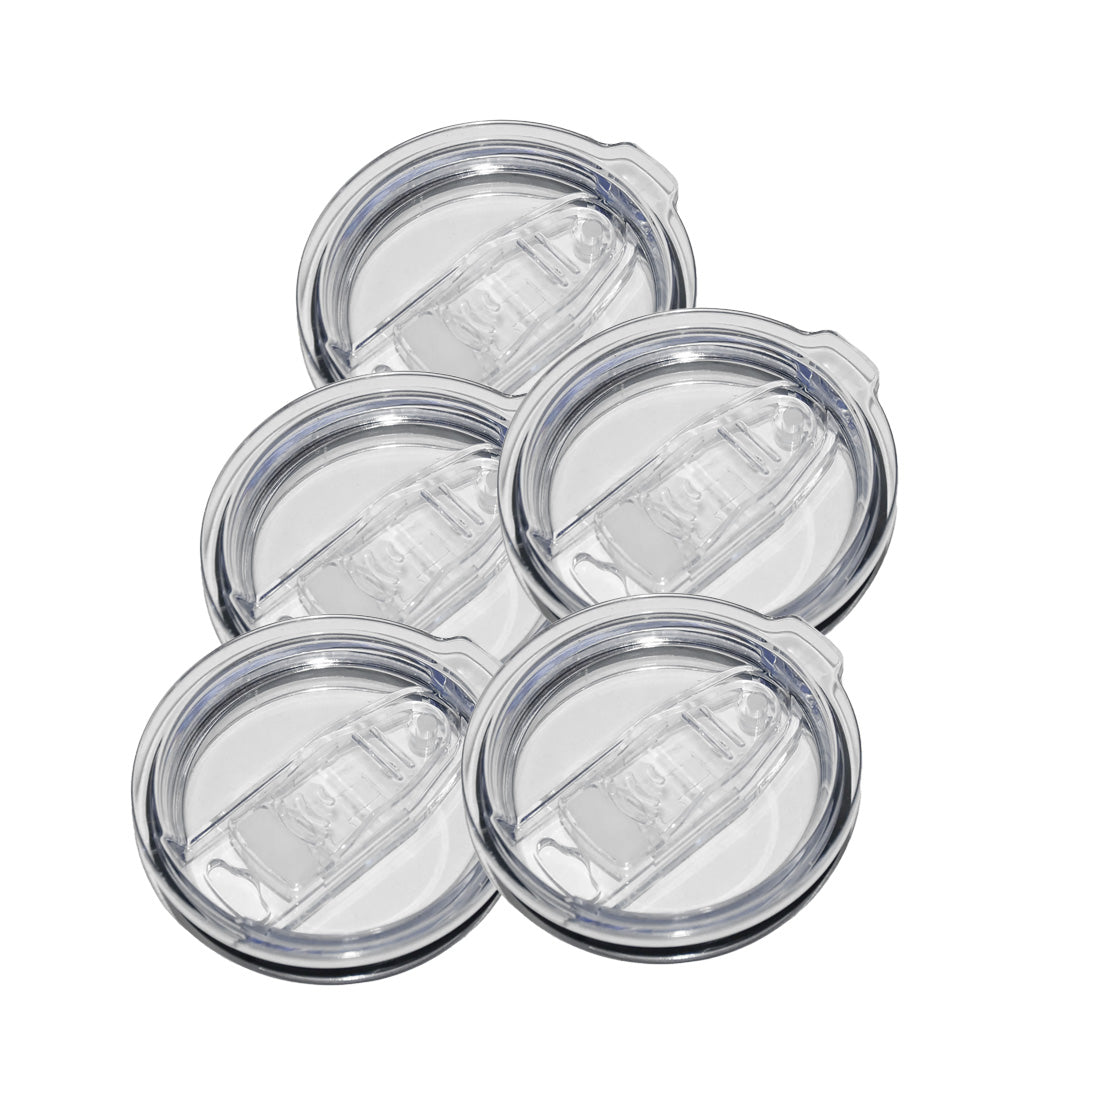 Joto 20oz Stainless Steel Tumbler lids - Pack of 5 - Joto Imaging Supplies Canada